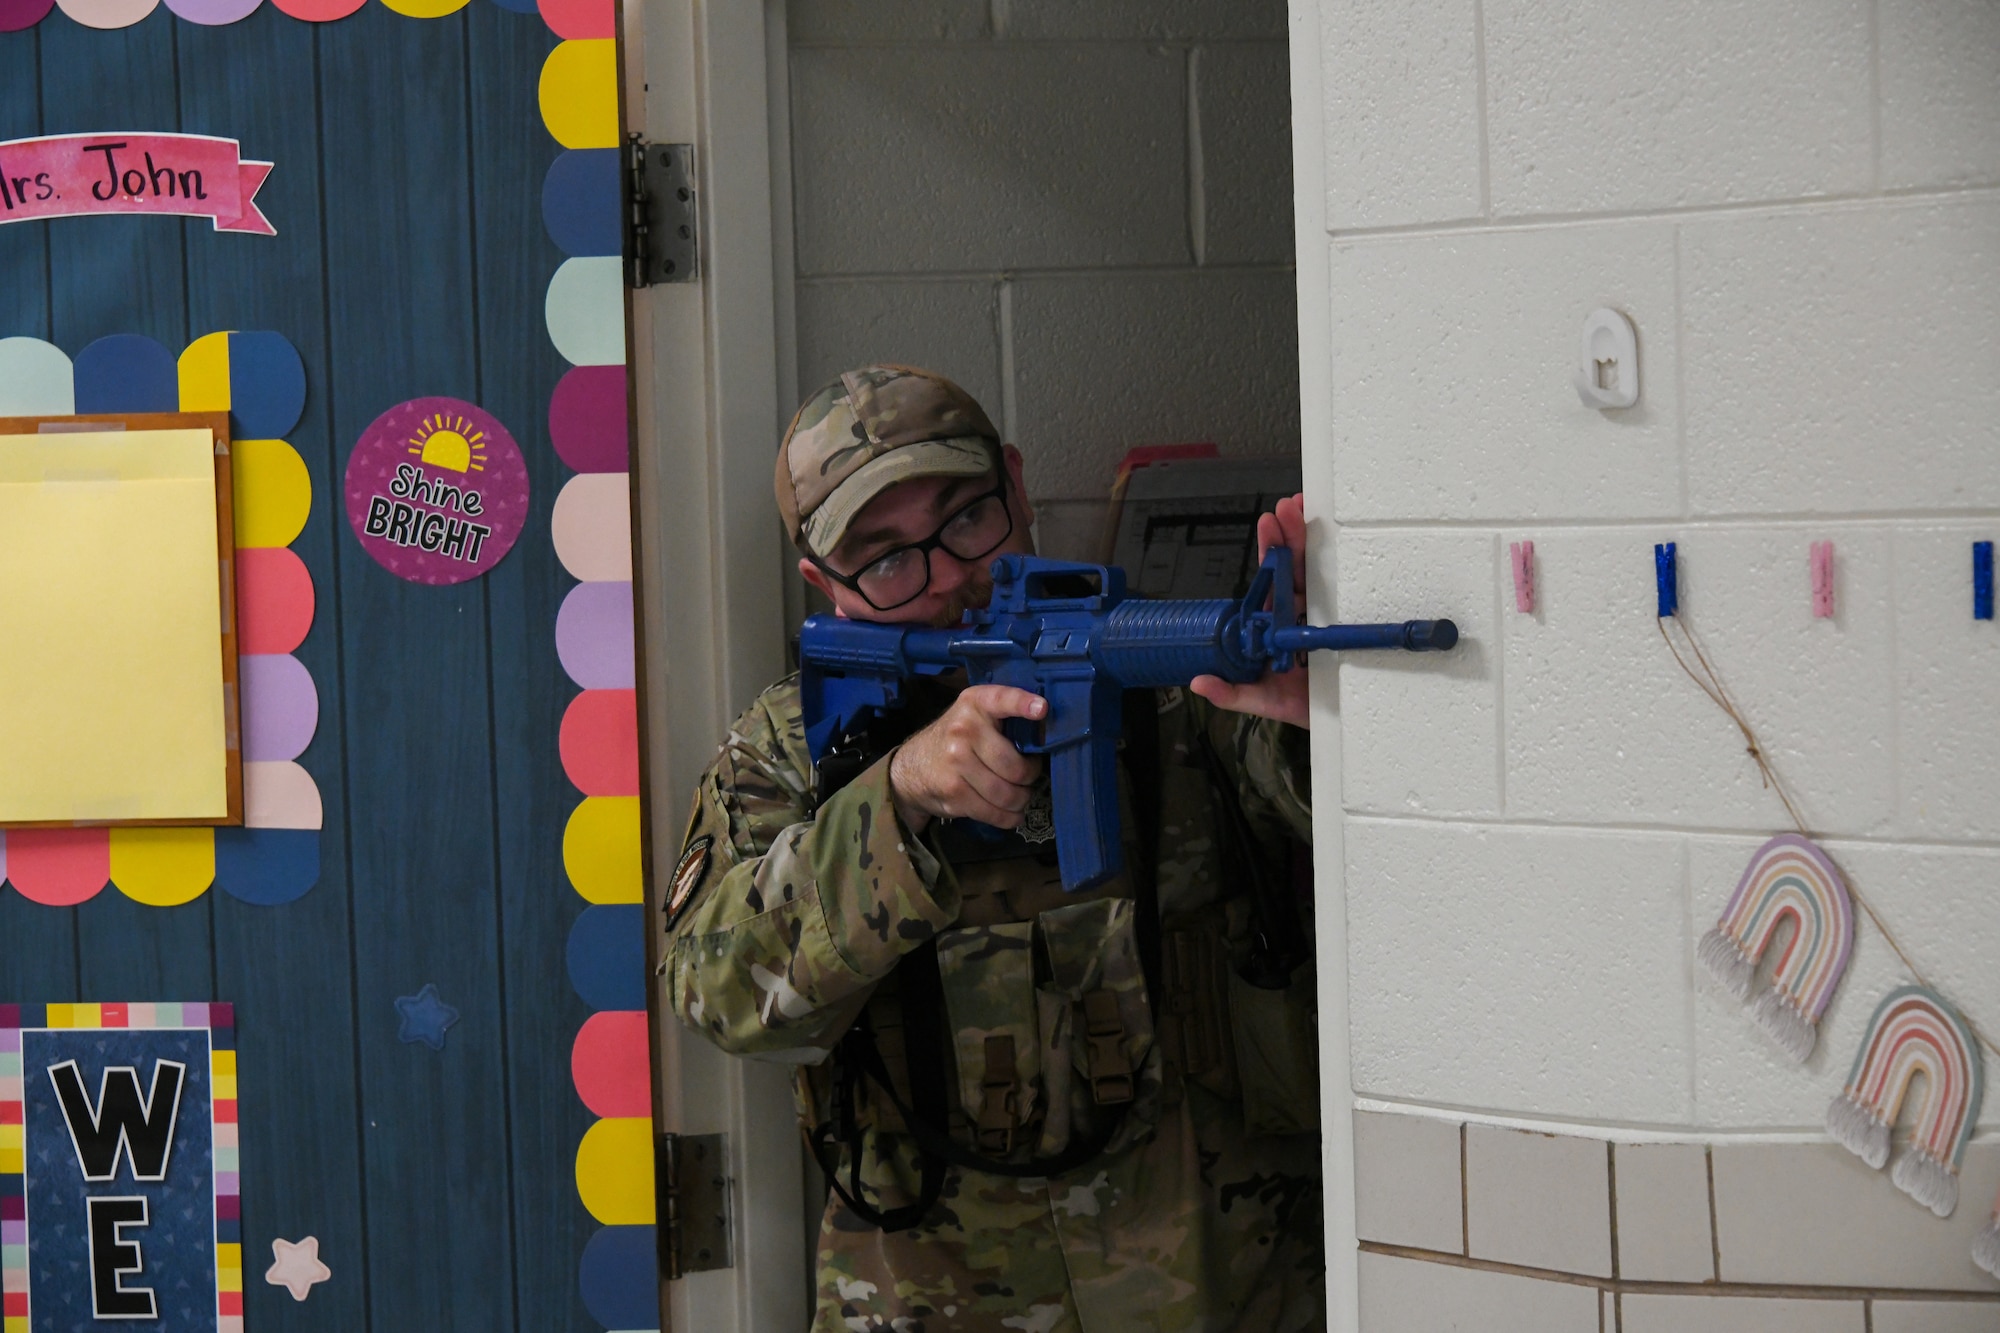 U.S. Air Force Senior Airman Jeffery Warwick, 97th Security Forces Squadron patrolman, guards a door during an active shooter training exercise at Altus Air Force Base, Oklahoma, Aug. 8, 2022. The exercise was a base-wide effort, including active participants from various groups and squadrons. (U.S. Air Force photo by Airman 1st Class Miyah Gray)